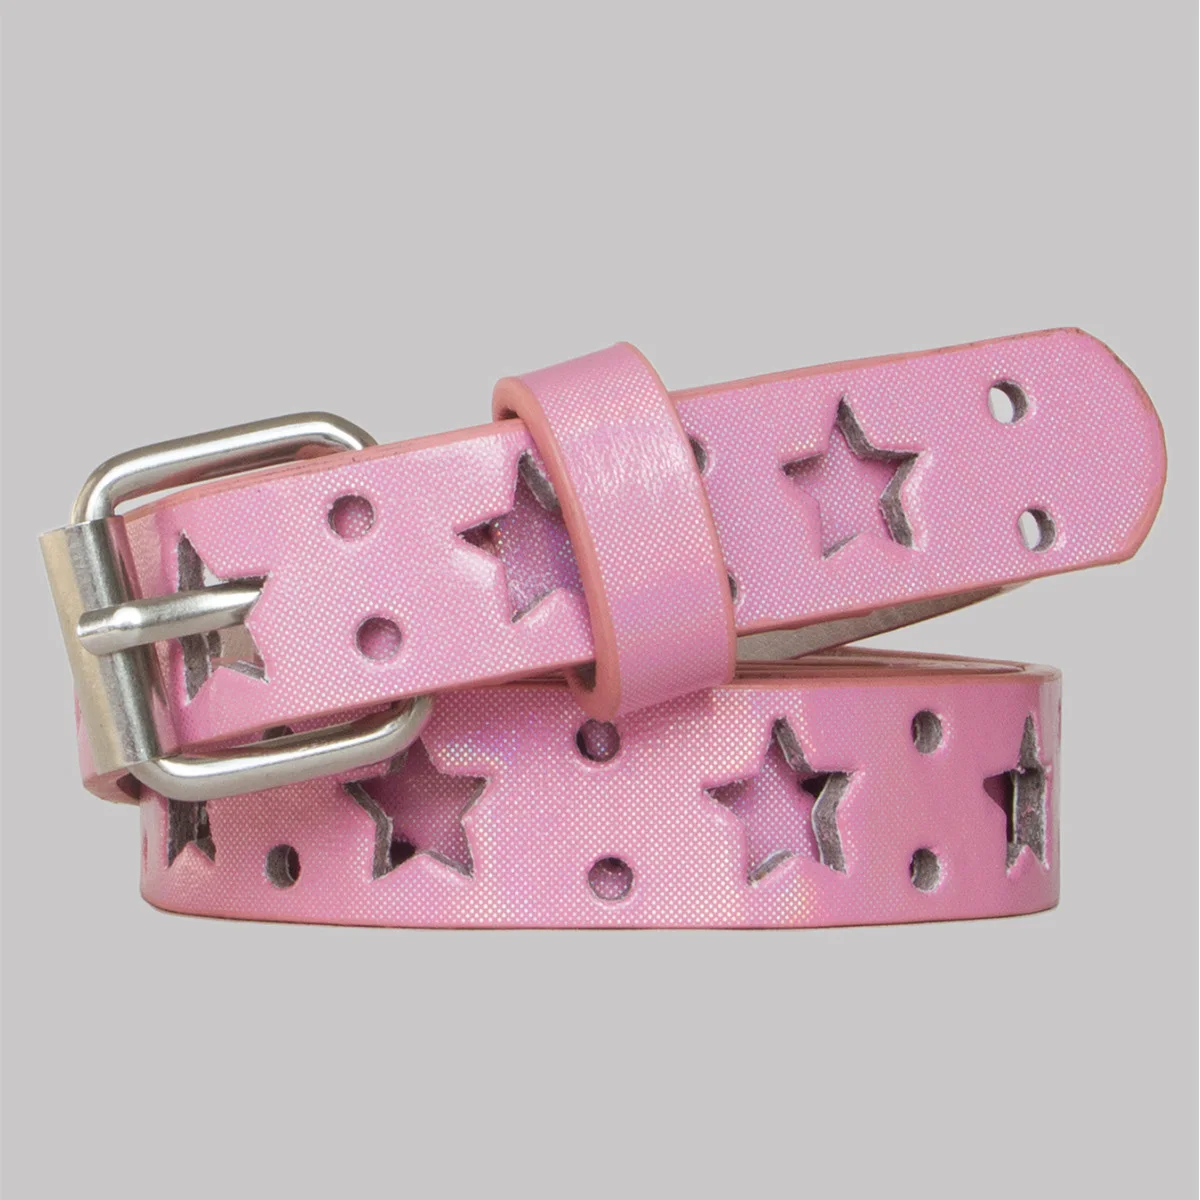 New Y2K Retro Fashion Waist Belt Edgy And Trendy Belt With Cut-out Design Pentacle And Heart Thin Waist Belt Women And Men